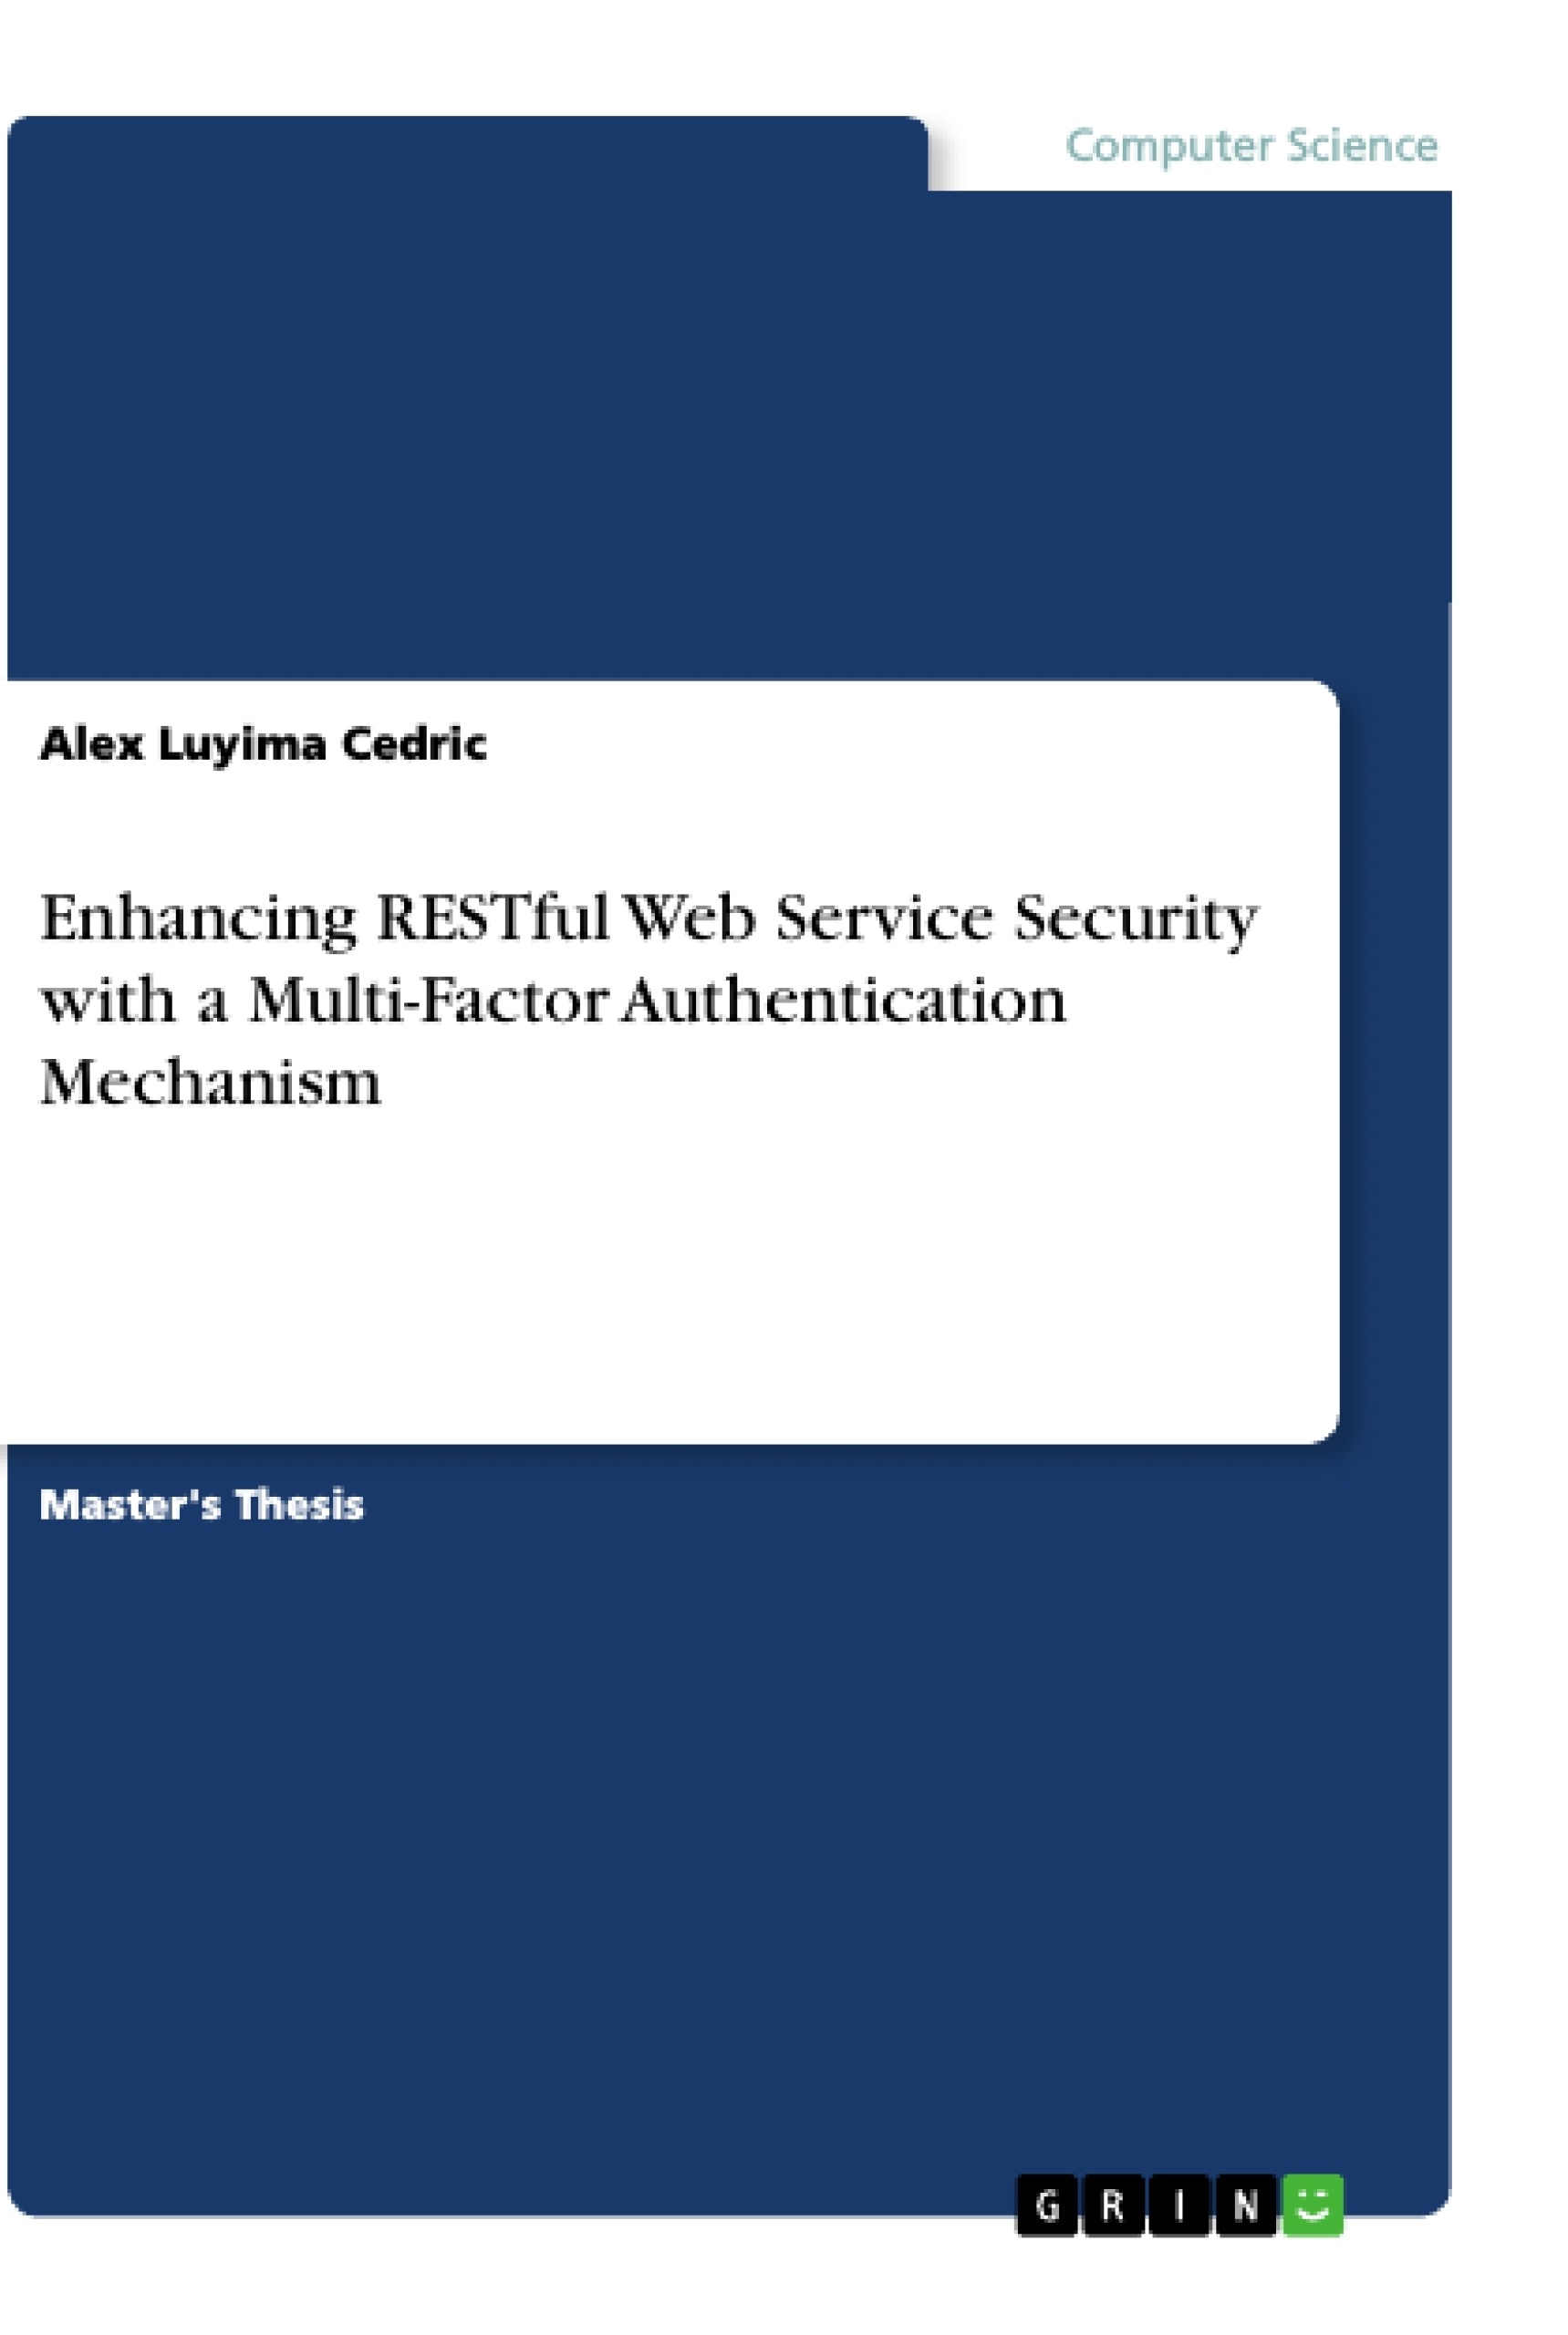 Título: Enhancing RESTful Web Service Security with a Multi-Factor Authentication Mechanism